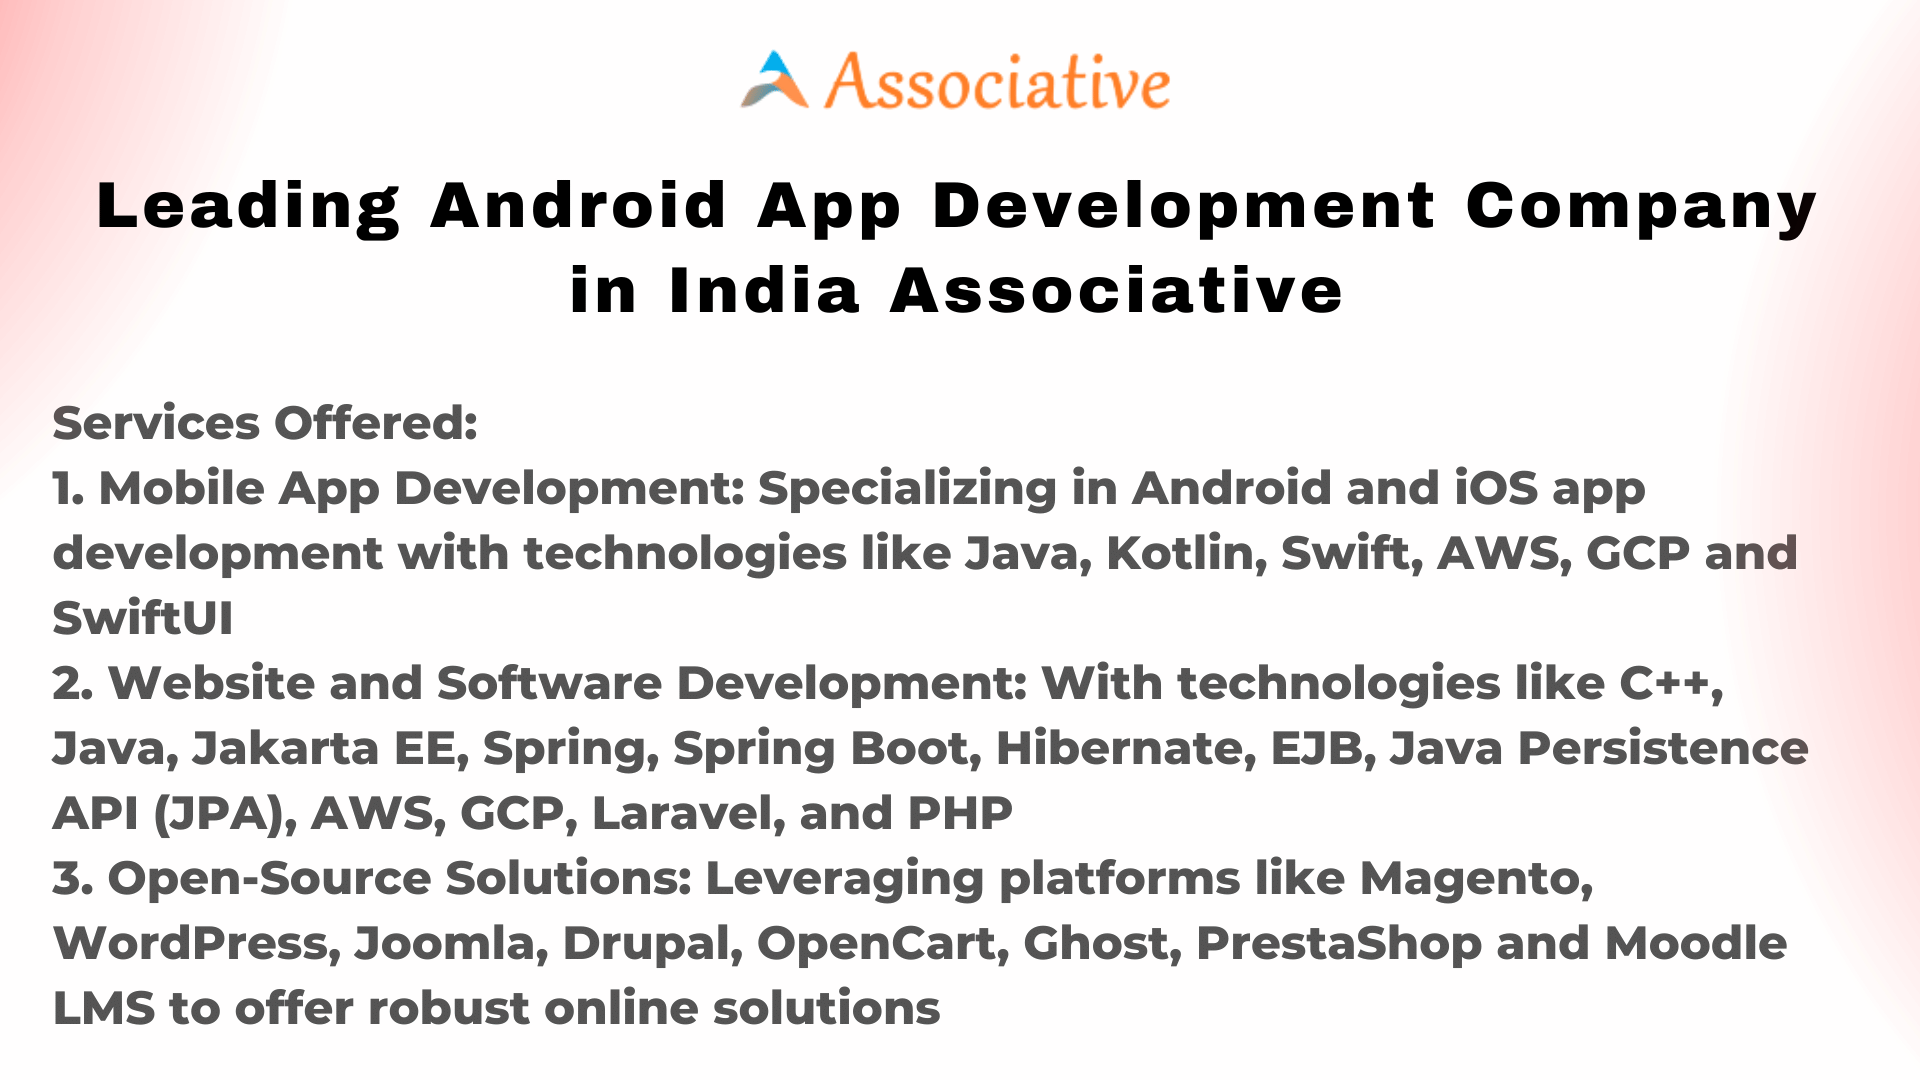 Leading Android App Development Company in India Associative